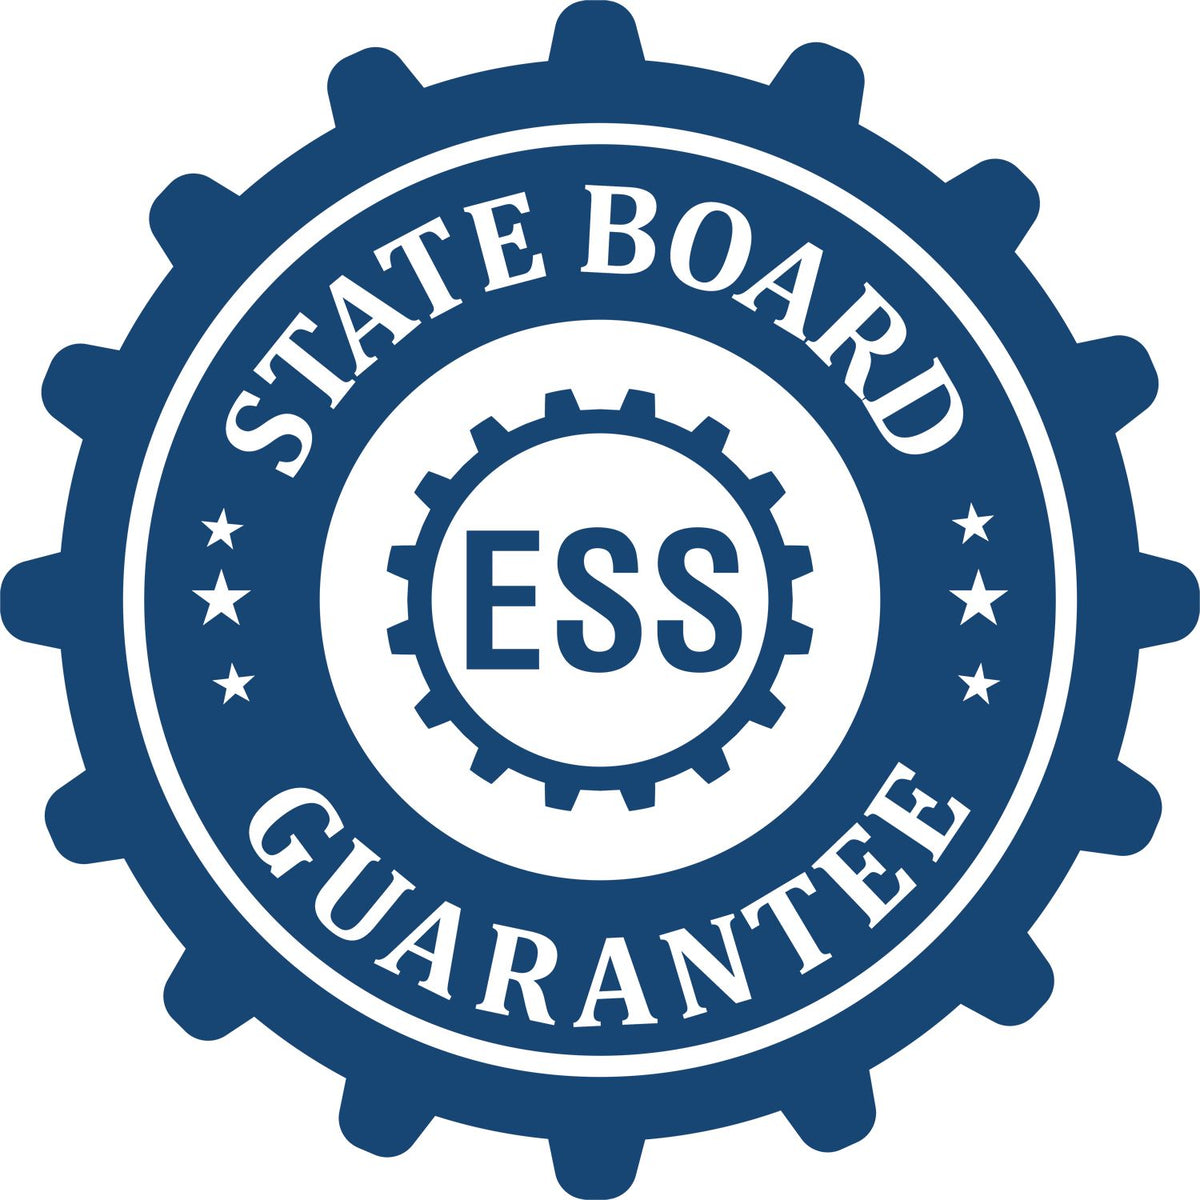 An emblem in a gear shape illustrating a state board guarantee for the Hybrid New Mexico Architect Seal